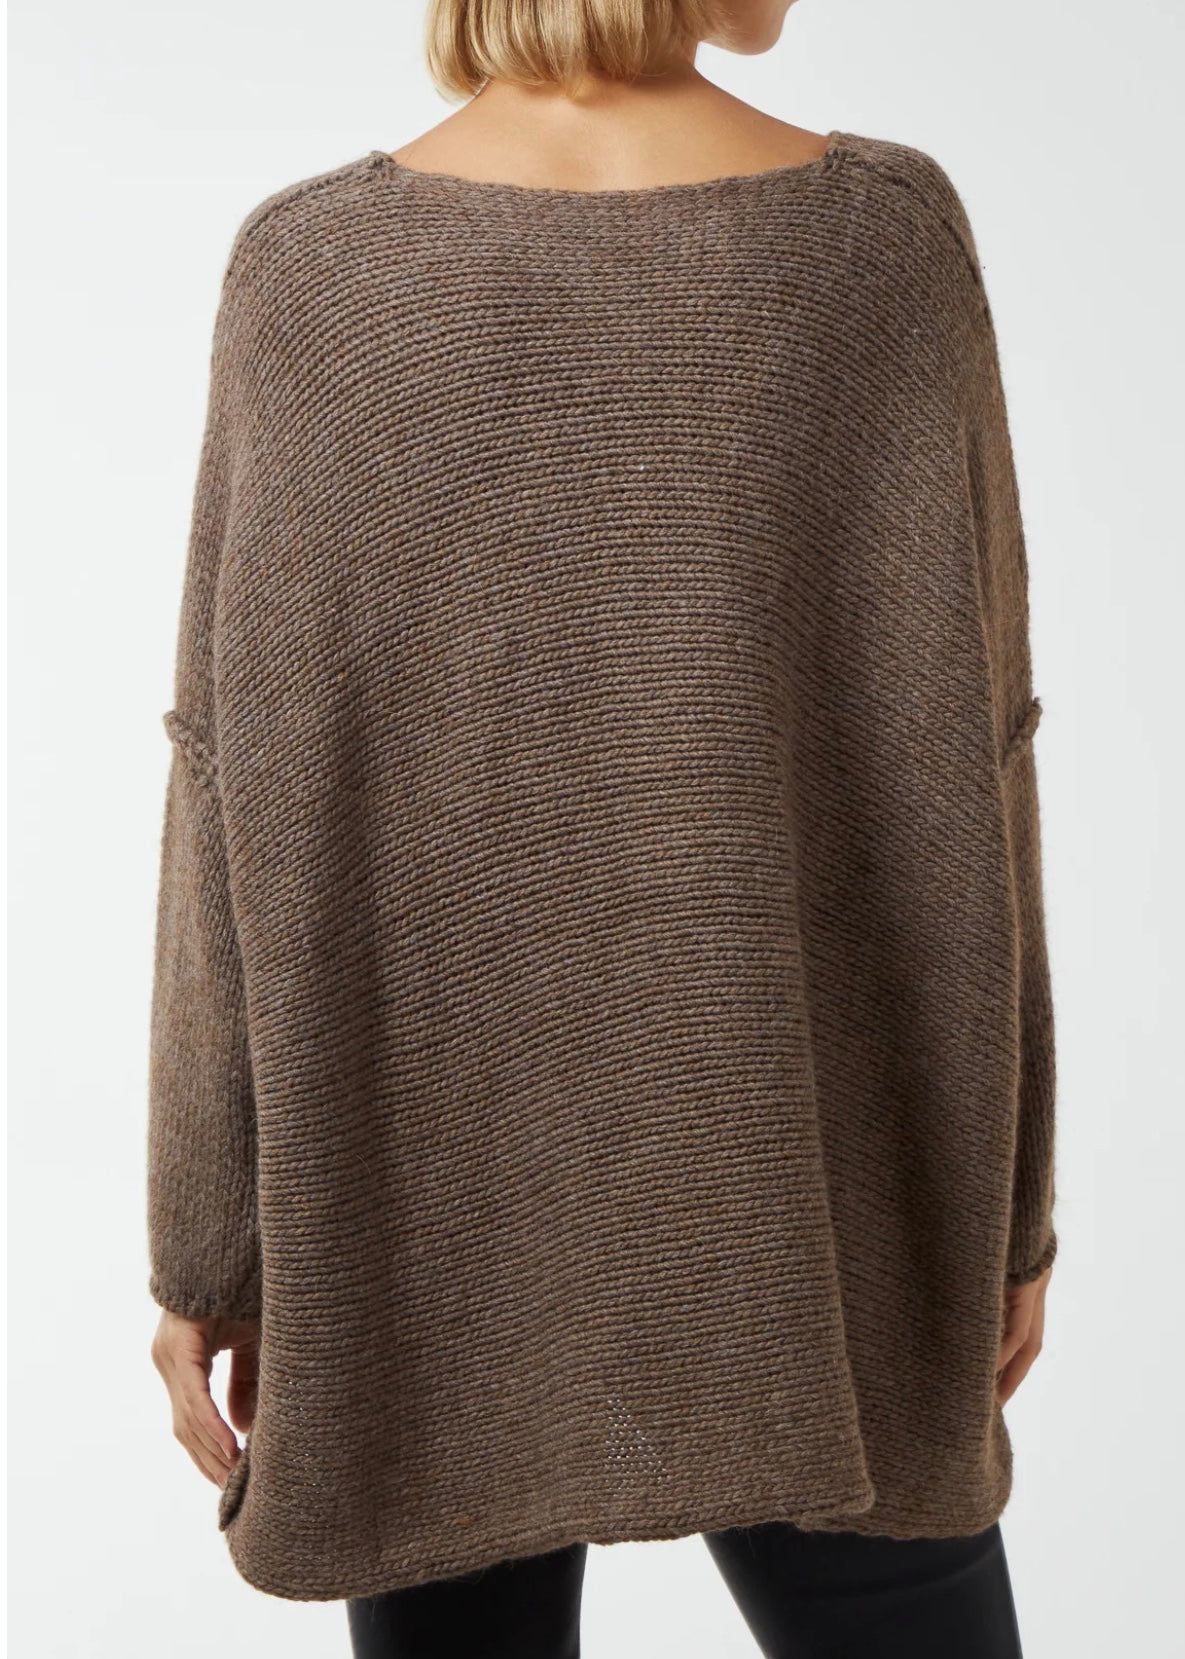 Sands - Asymmetric Exposed Seams Knit / Chocolate